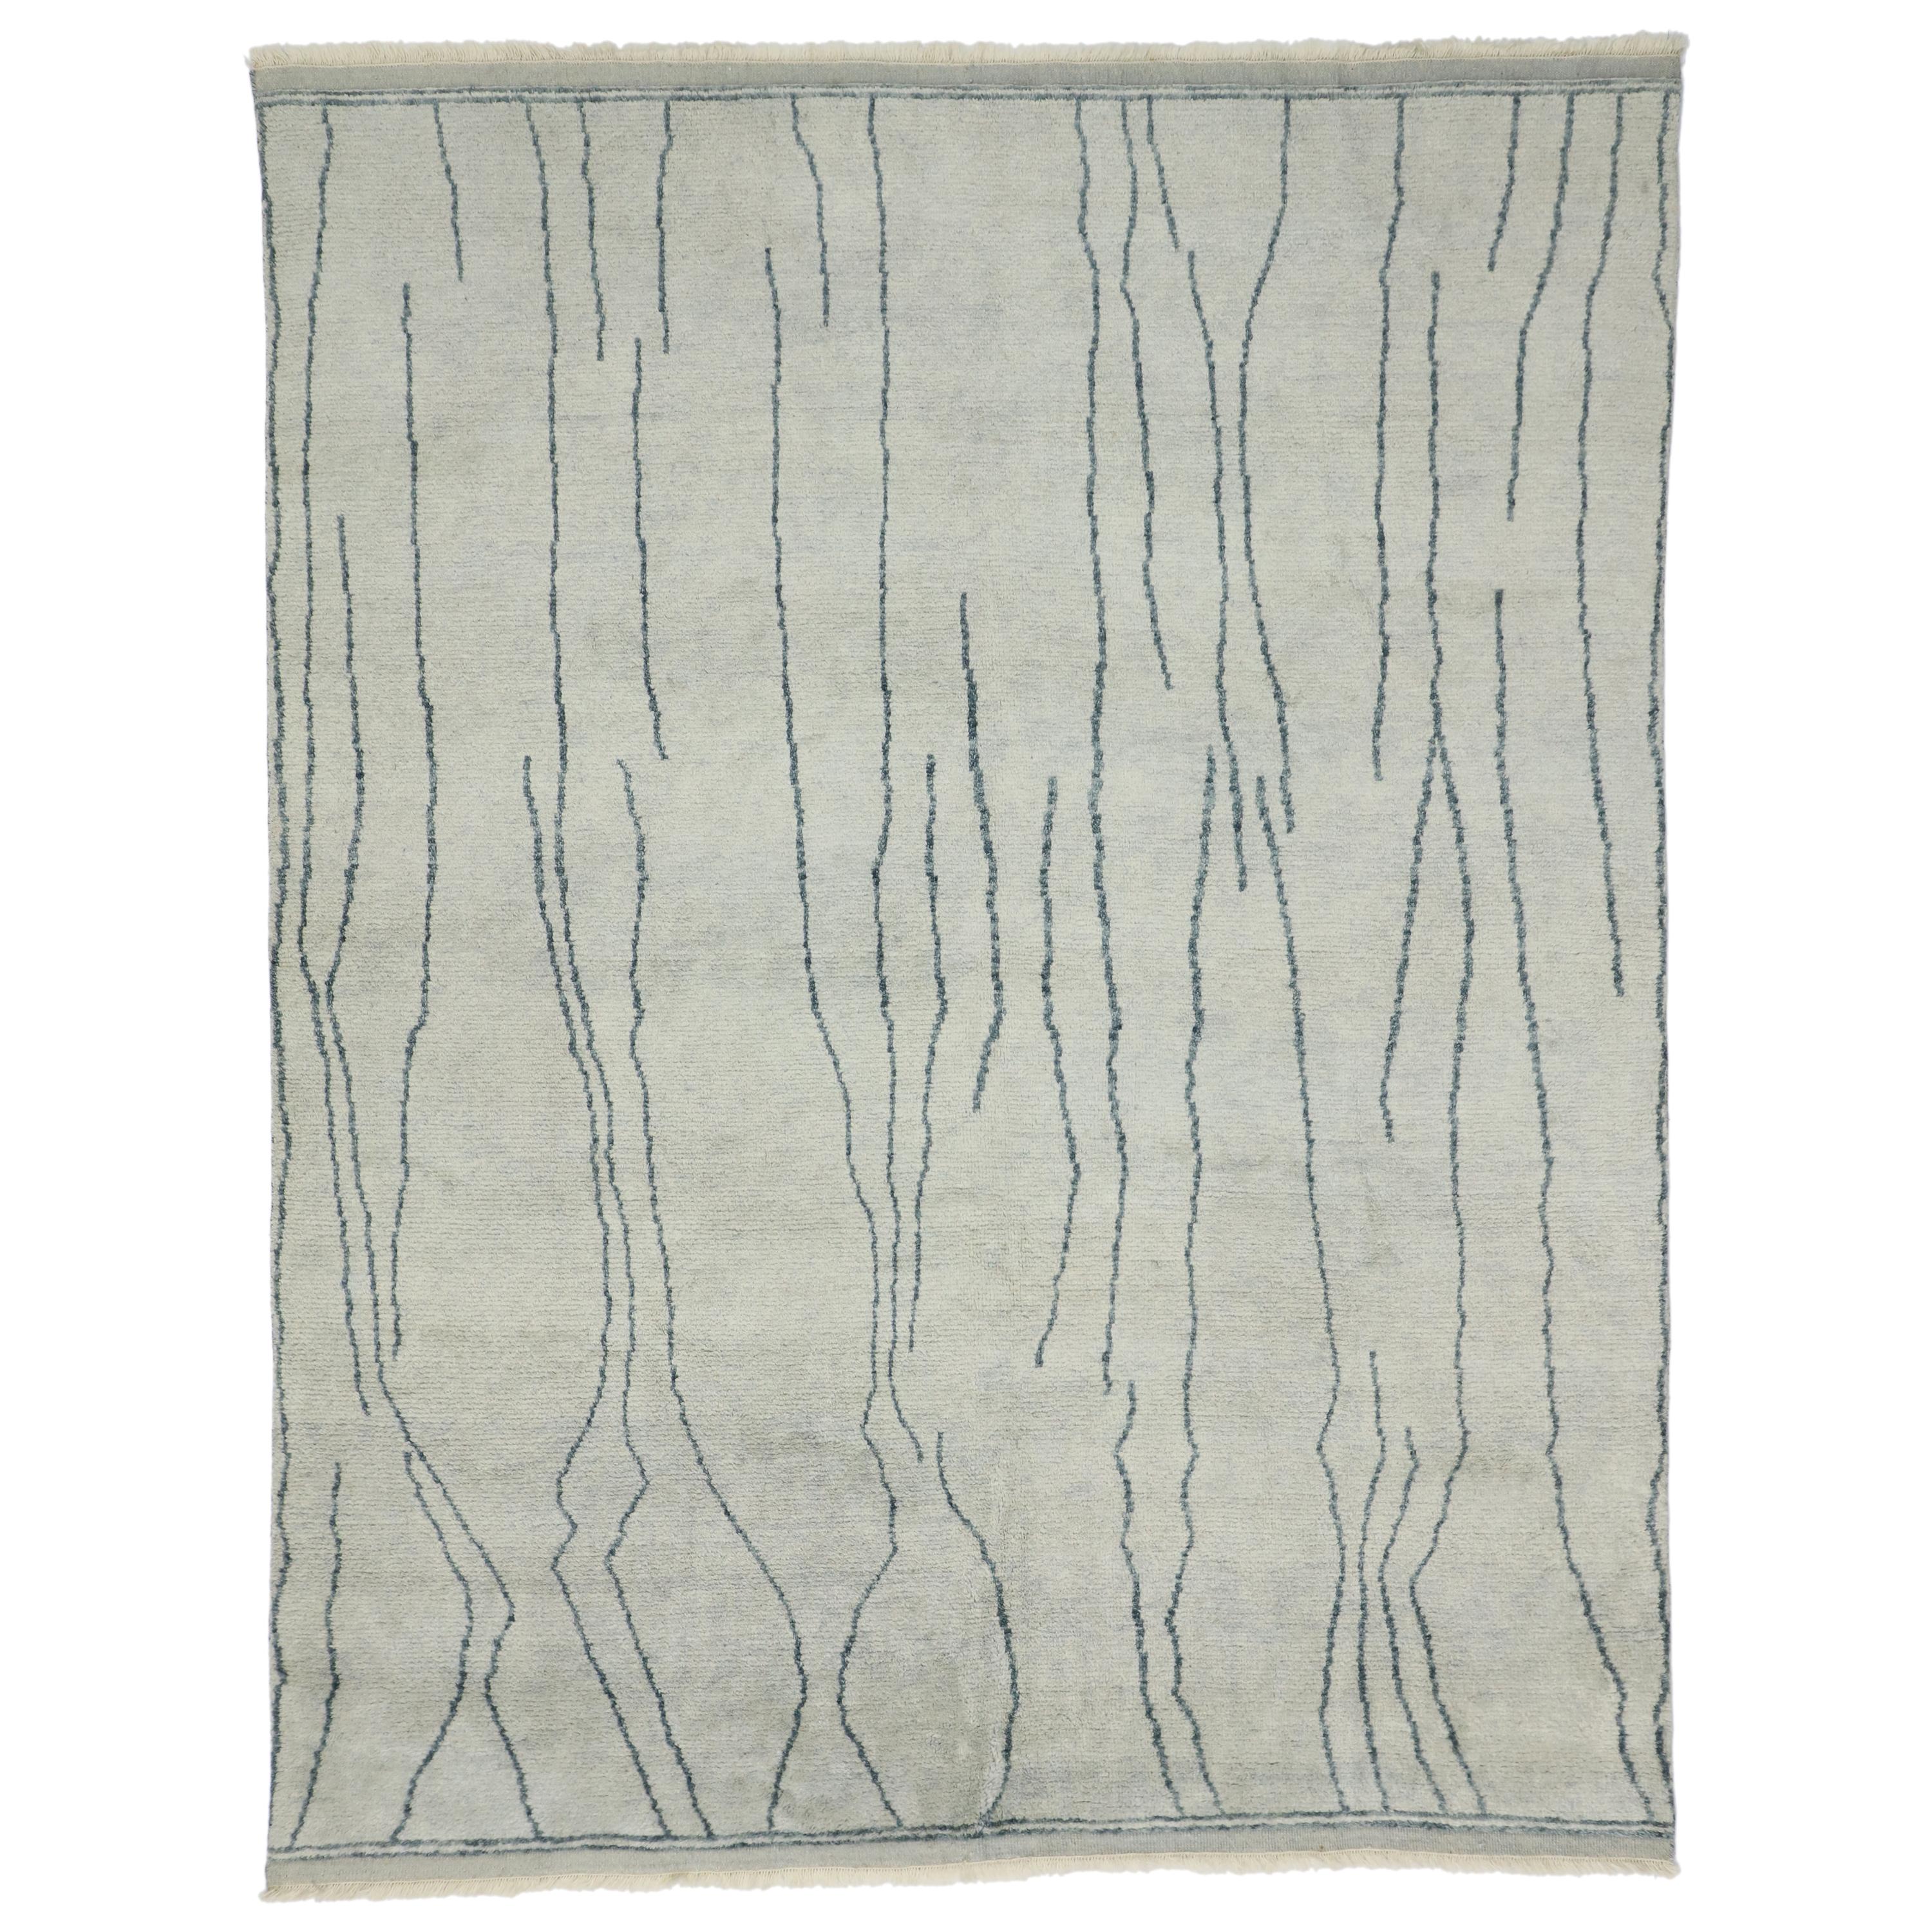 New Contemporary Moroccan Area Rug with Linear Design